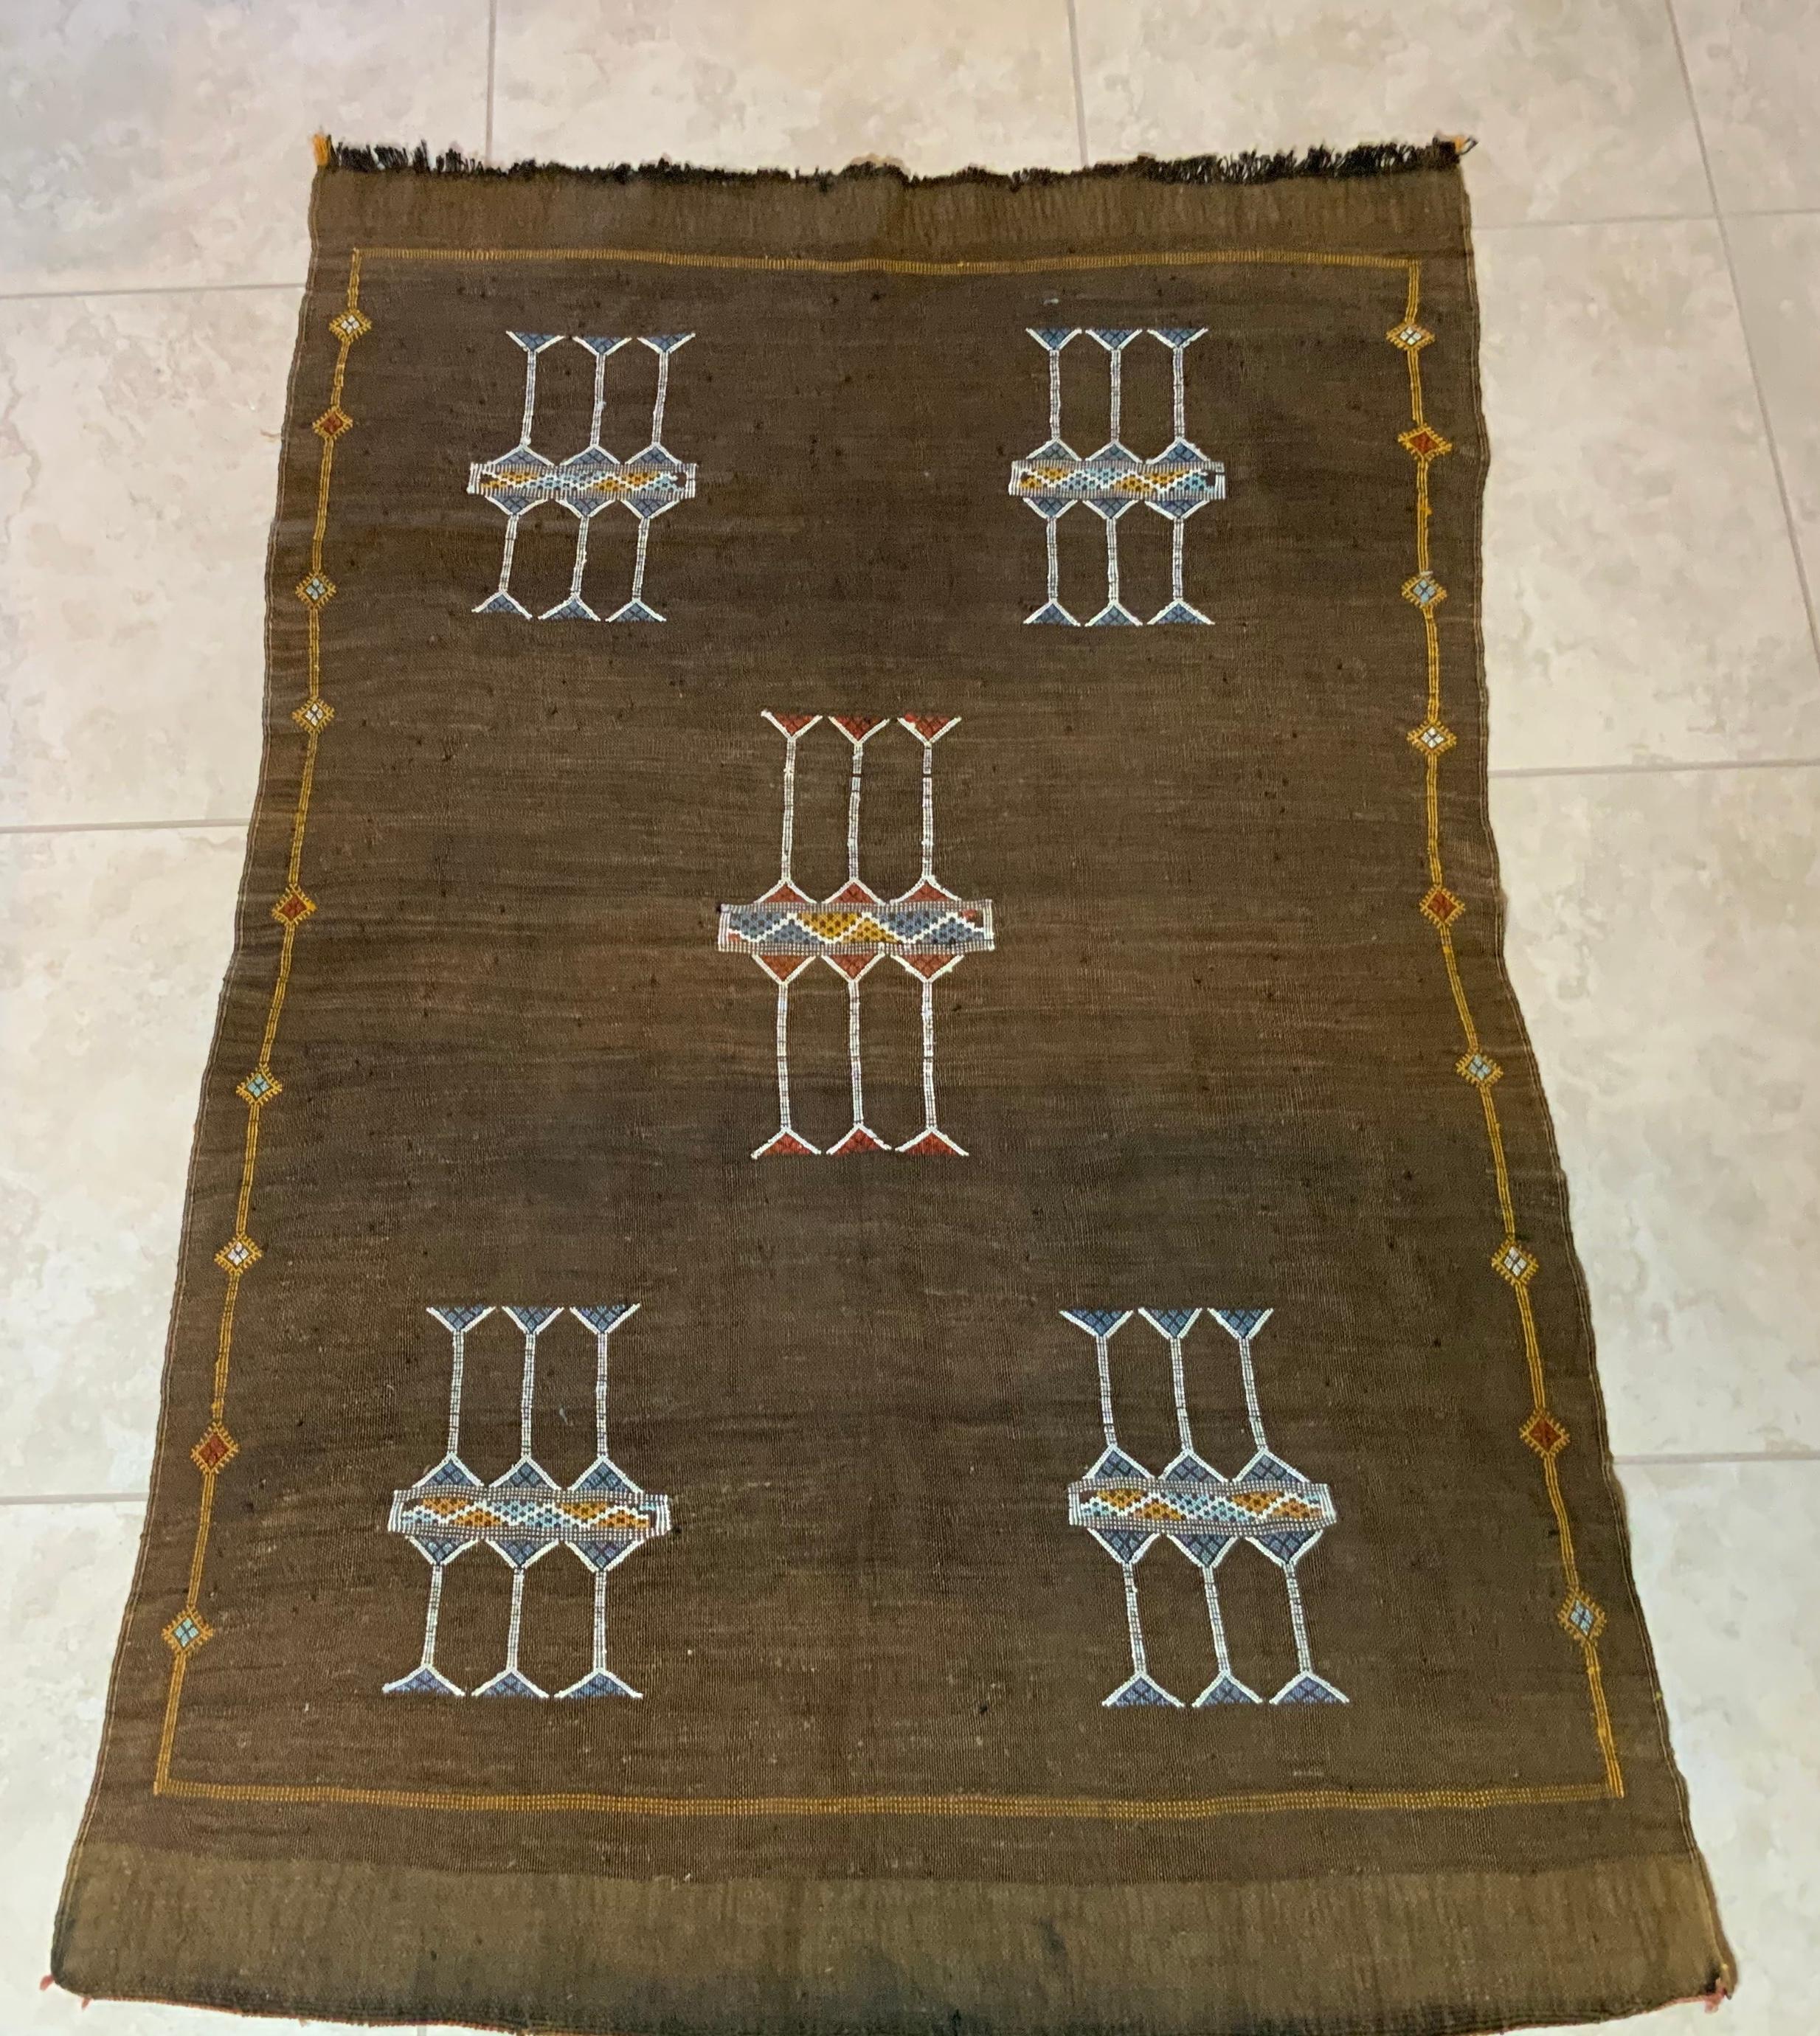 Beautiful decorative handwoven rug with soft multi-color geometric motifs. Nicely feel to touch .
Could be used as a wall hanging tapestry, lay on the floor, or couch.